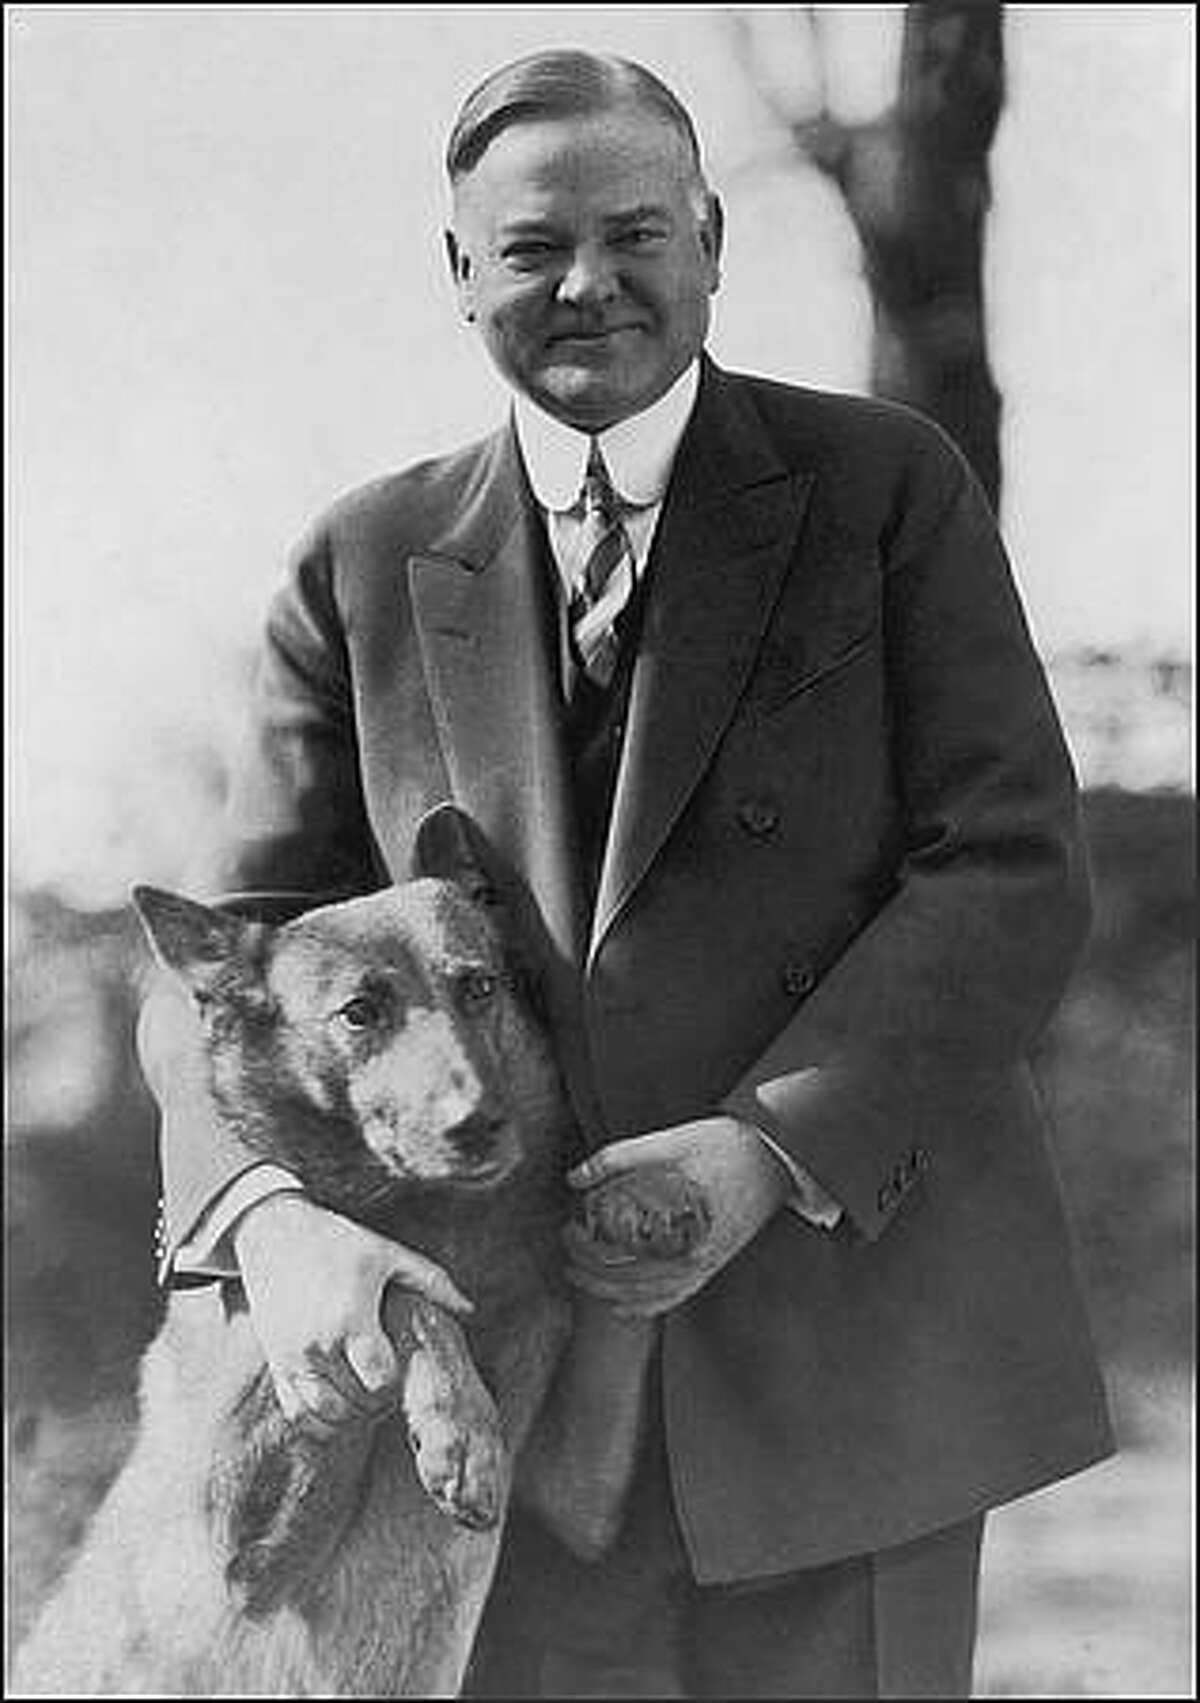 circa 1935: Herbert Hoover (1874 - 1964), the 31st President of the United States, with his dog. (Photo by Library Of Congress/Getty Images)